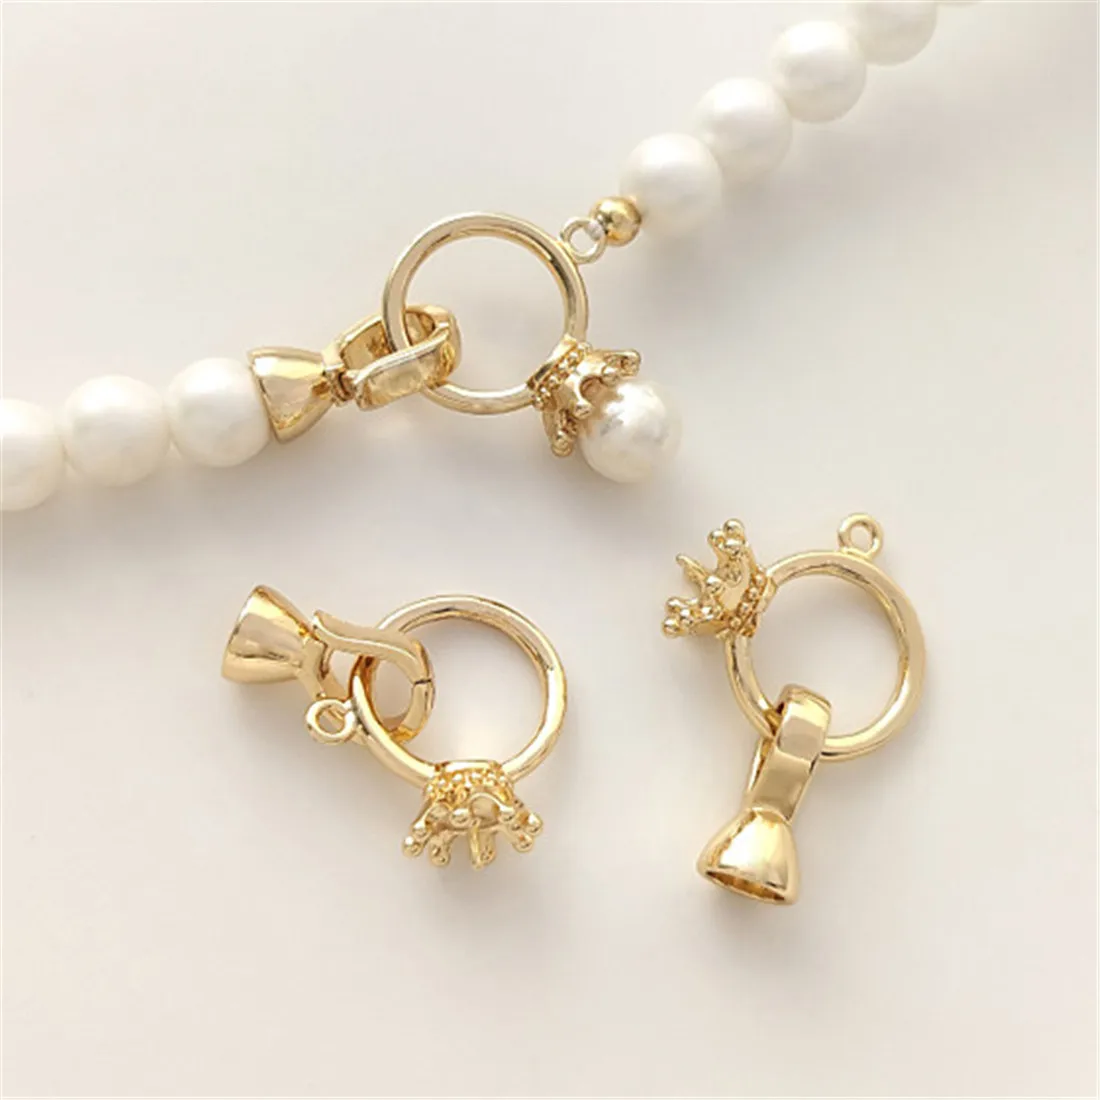 14K Gold-plated Half-hole Beaded Crown Ring Ring Necklace Buckle Diy Pearl Buckle Pendant Jewelry Accessories B977 vintage princess crown shape jewelry box decorative trinket box ring box jewelry organizer perfect gift for mother s day